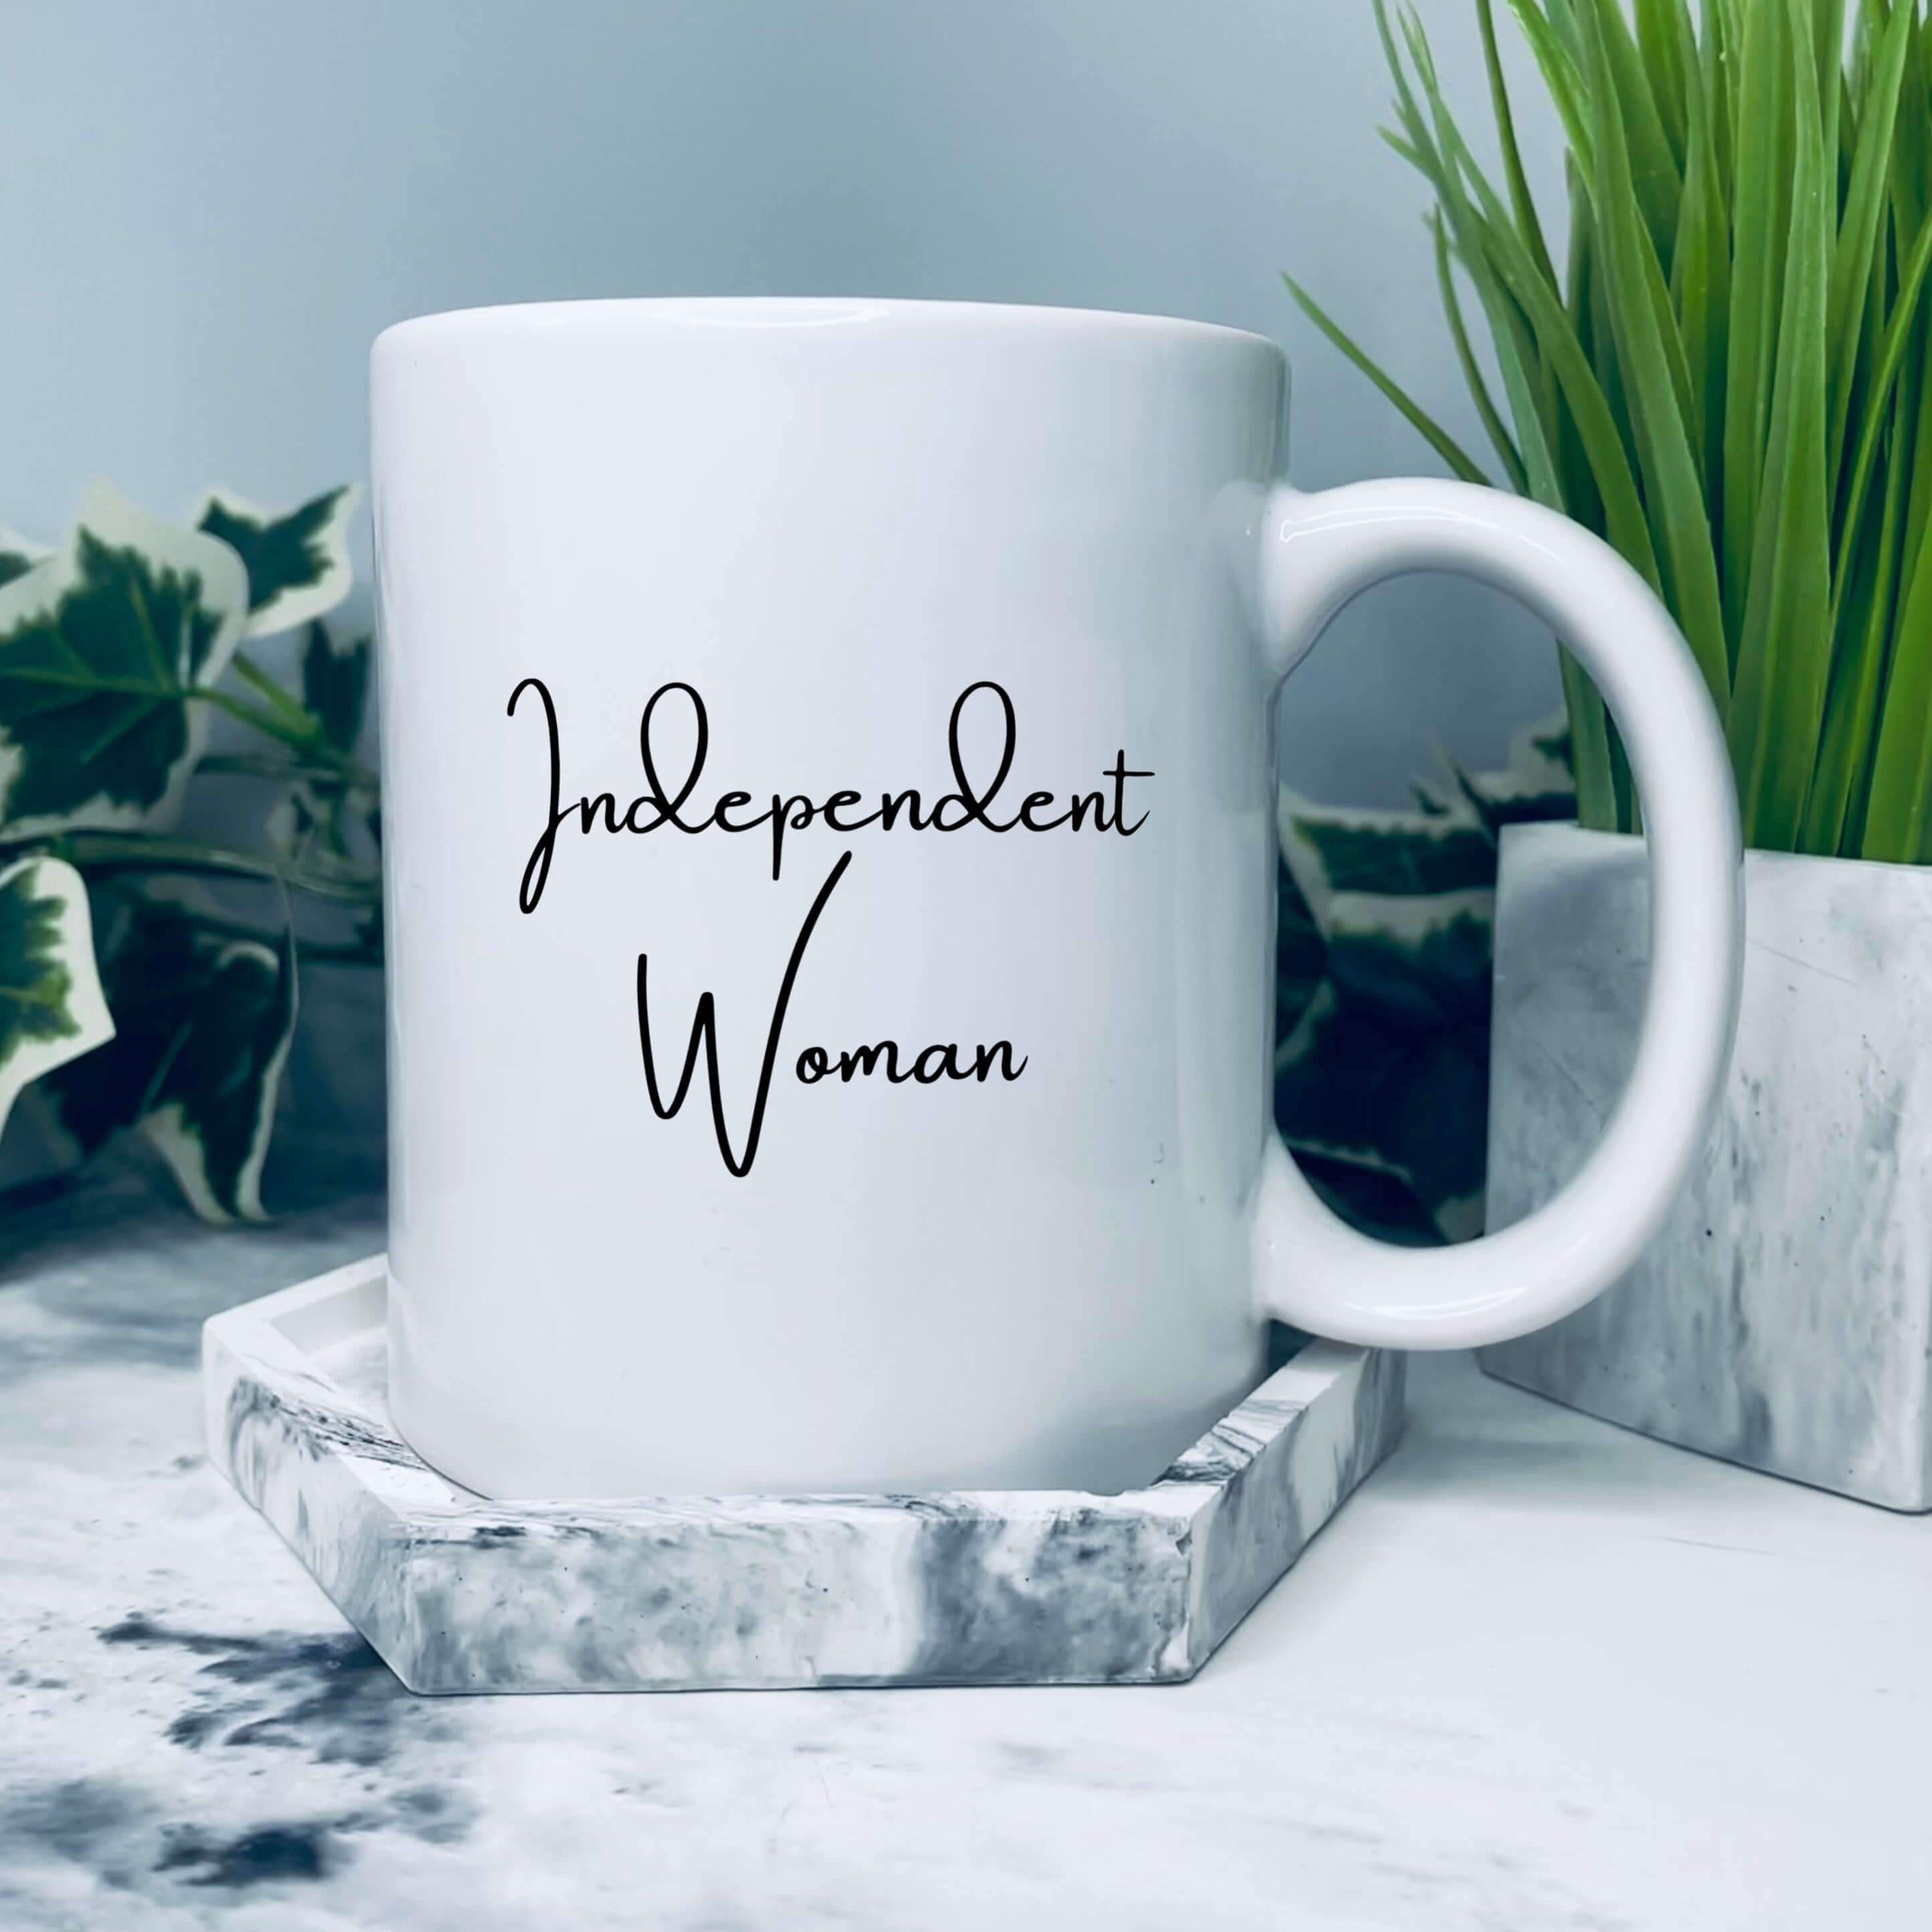 Mug with: Independent Woman on it.